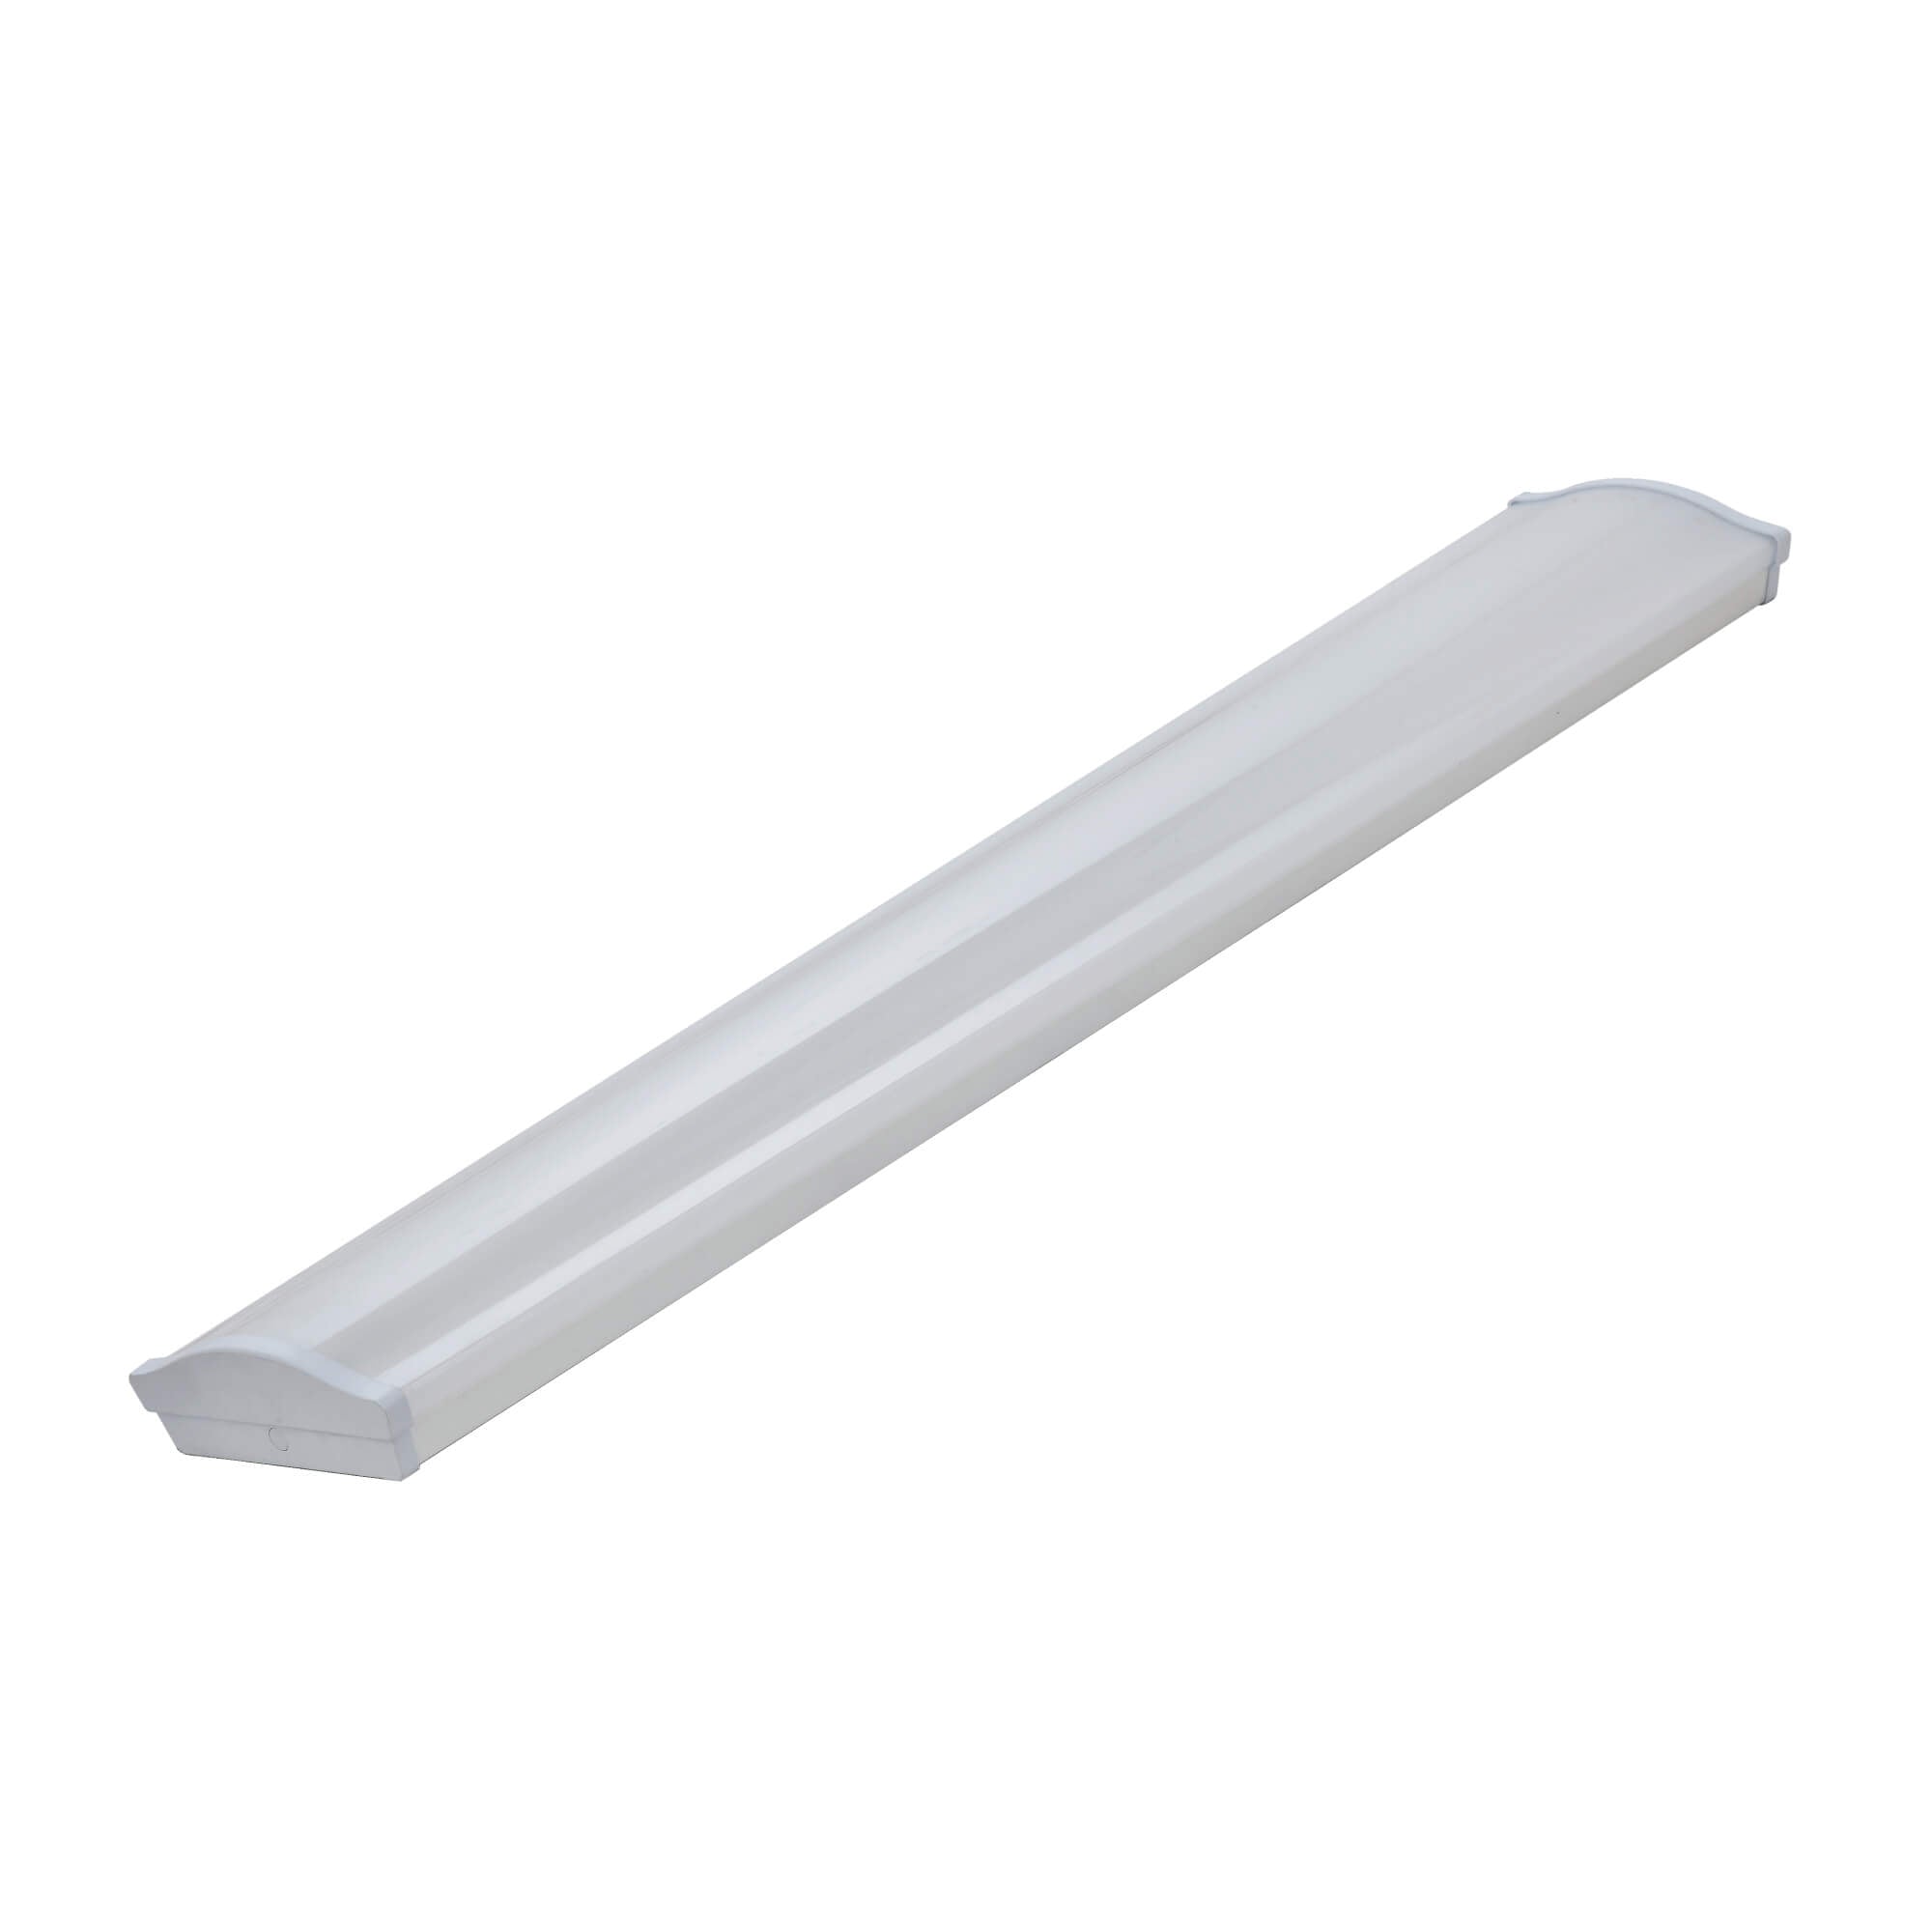 Halcon HG-L201 LED wrap light for commercial spaces with customizable color temperature and high efficiency